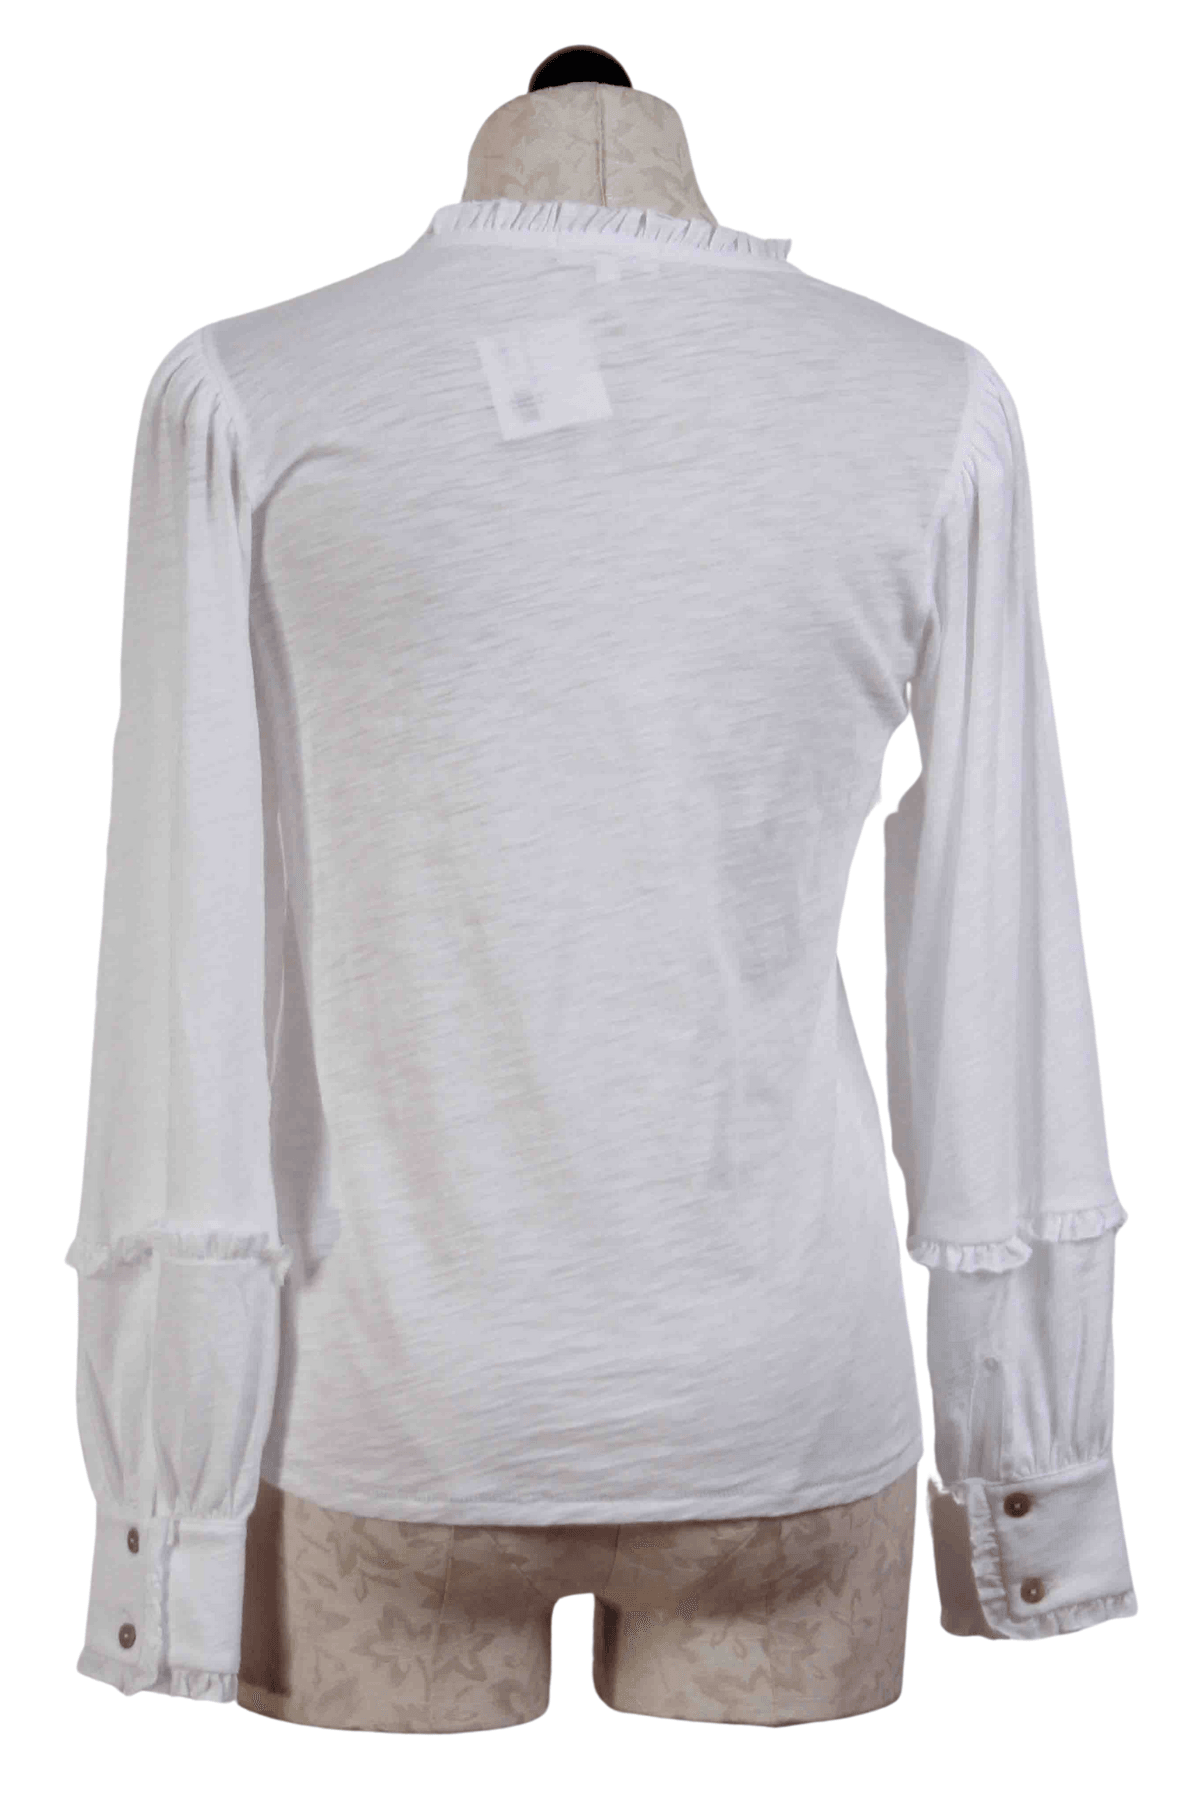 back view of white Long Sleeve Ruffle Crew Neck Tee by Goldie Tees with a Double Later Cuff